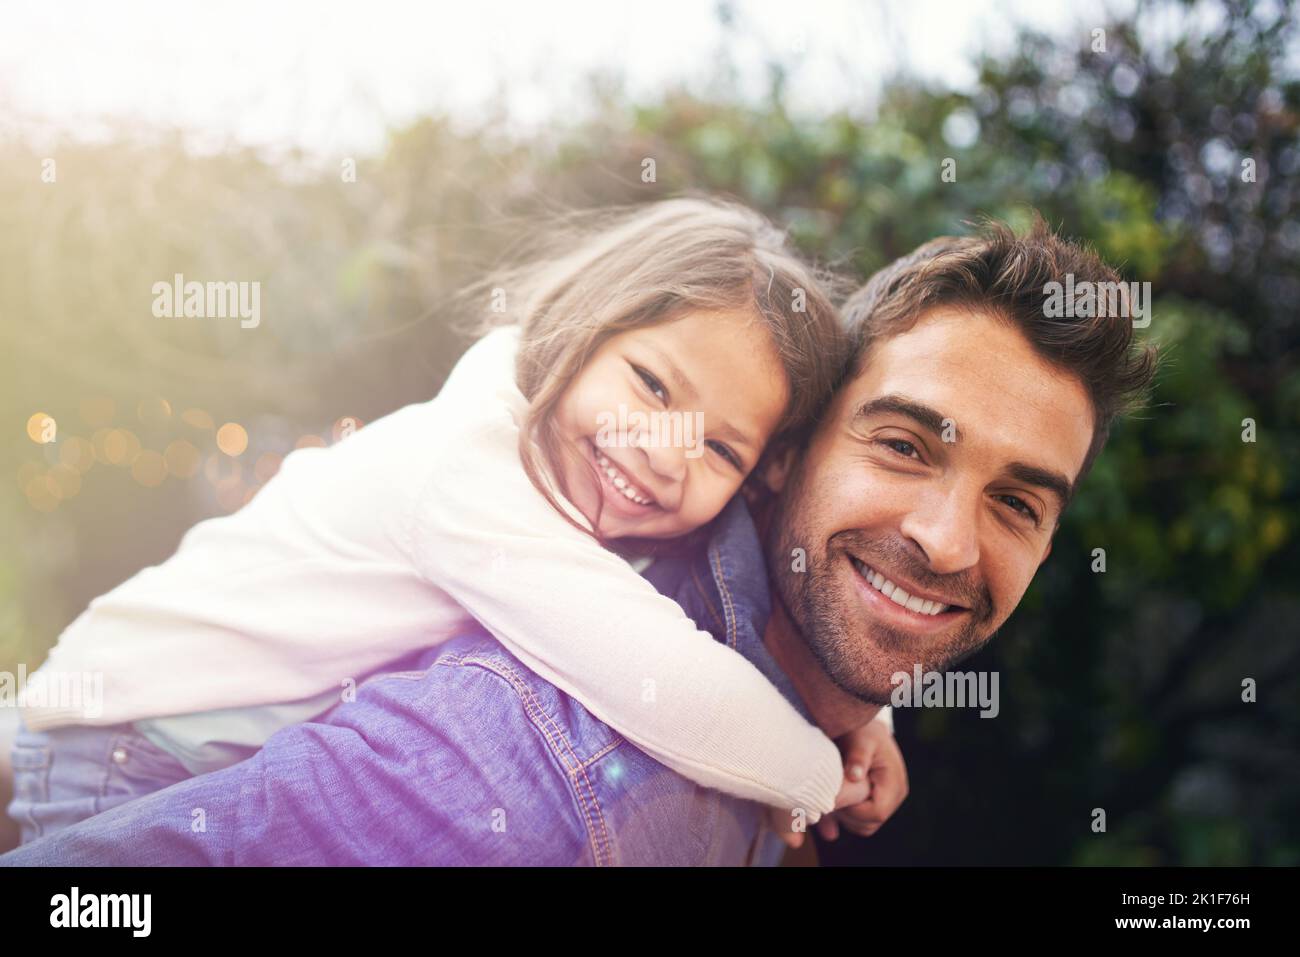 My little girl is my world. a little girl and her father playing together outdoors. Stock Photo